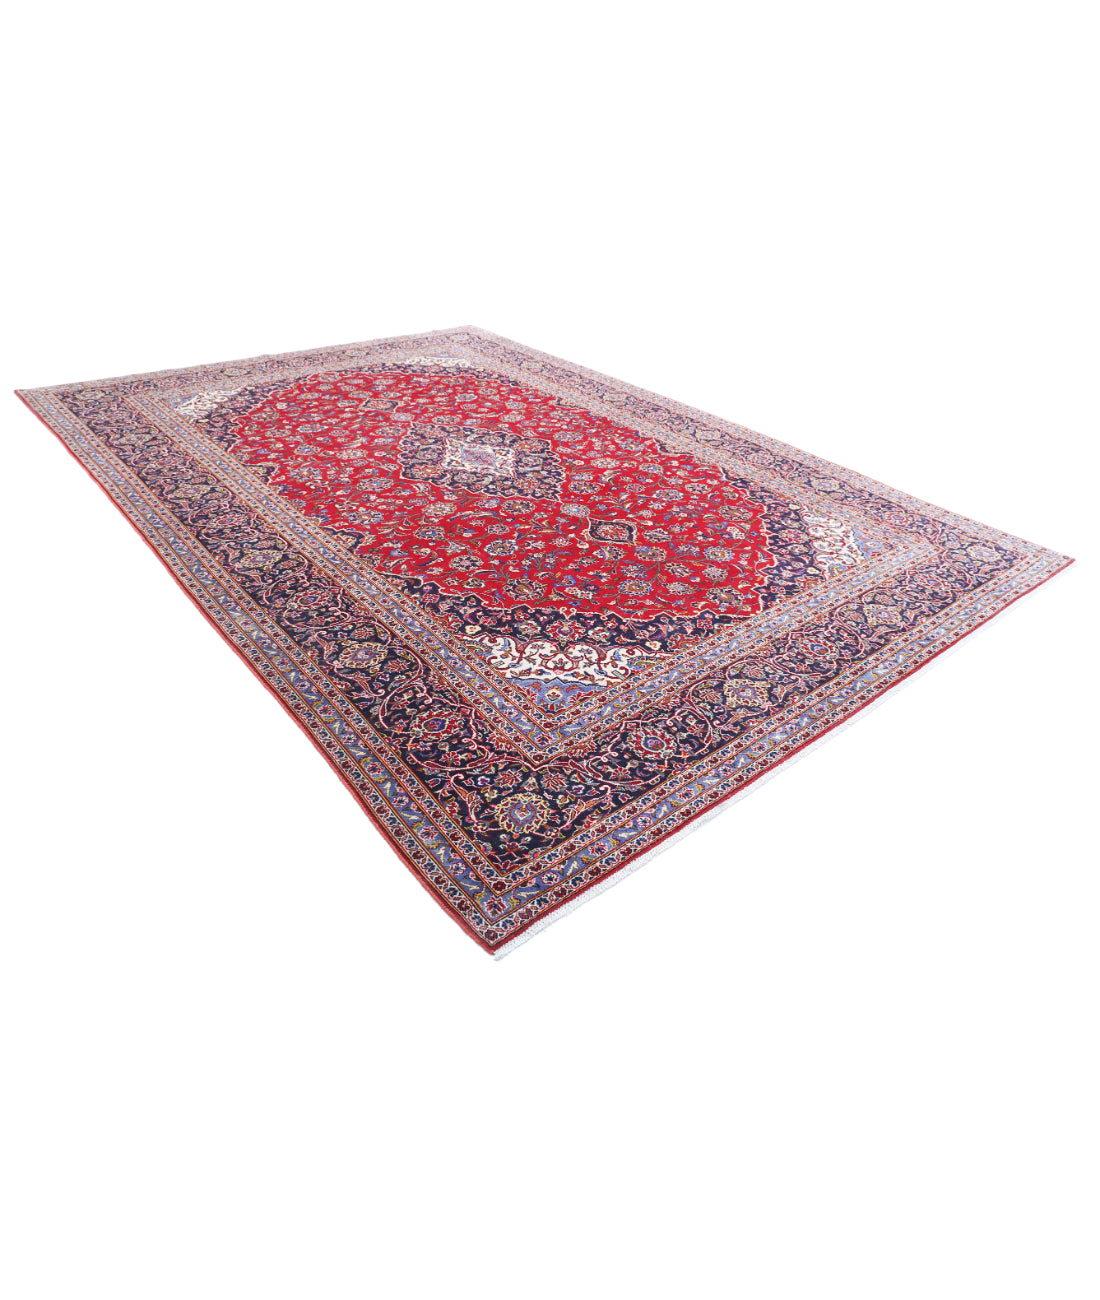 Hand Knotted Persian Kashan Wool Rug - 9'6'' x 13'6'' 9'6'' x 13'6'' (285 X 405) / Red / Blue